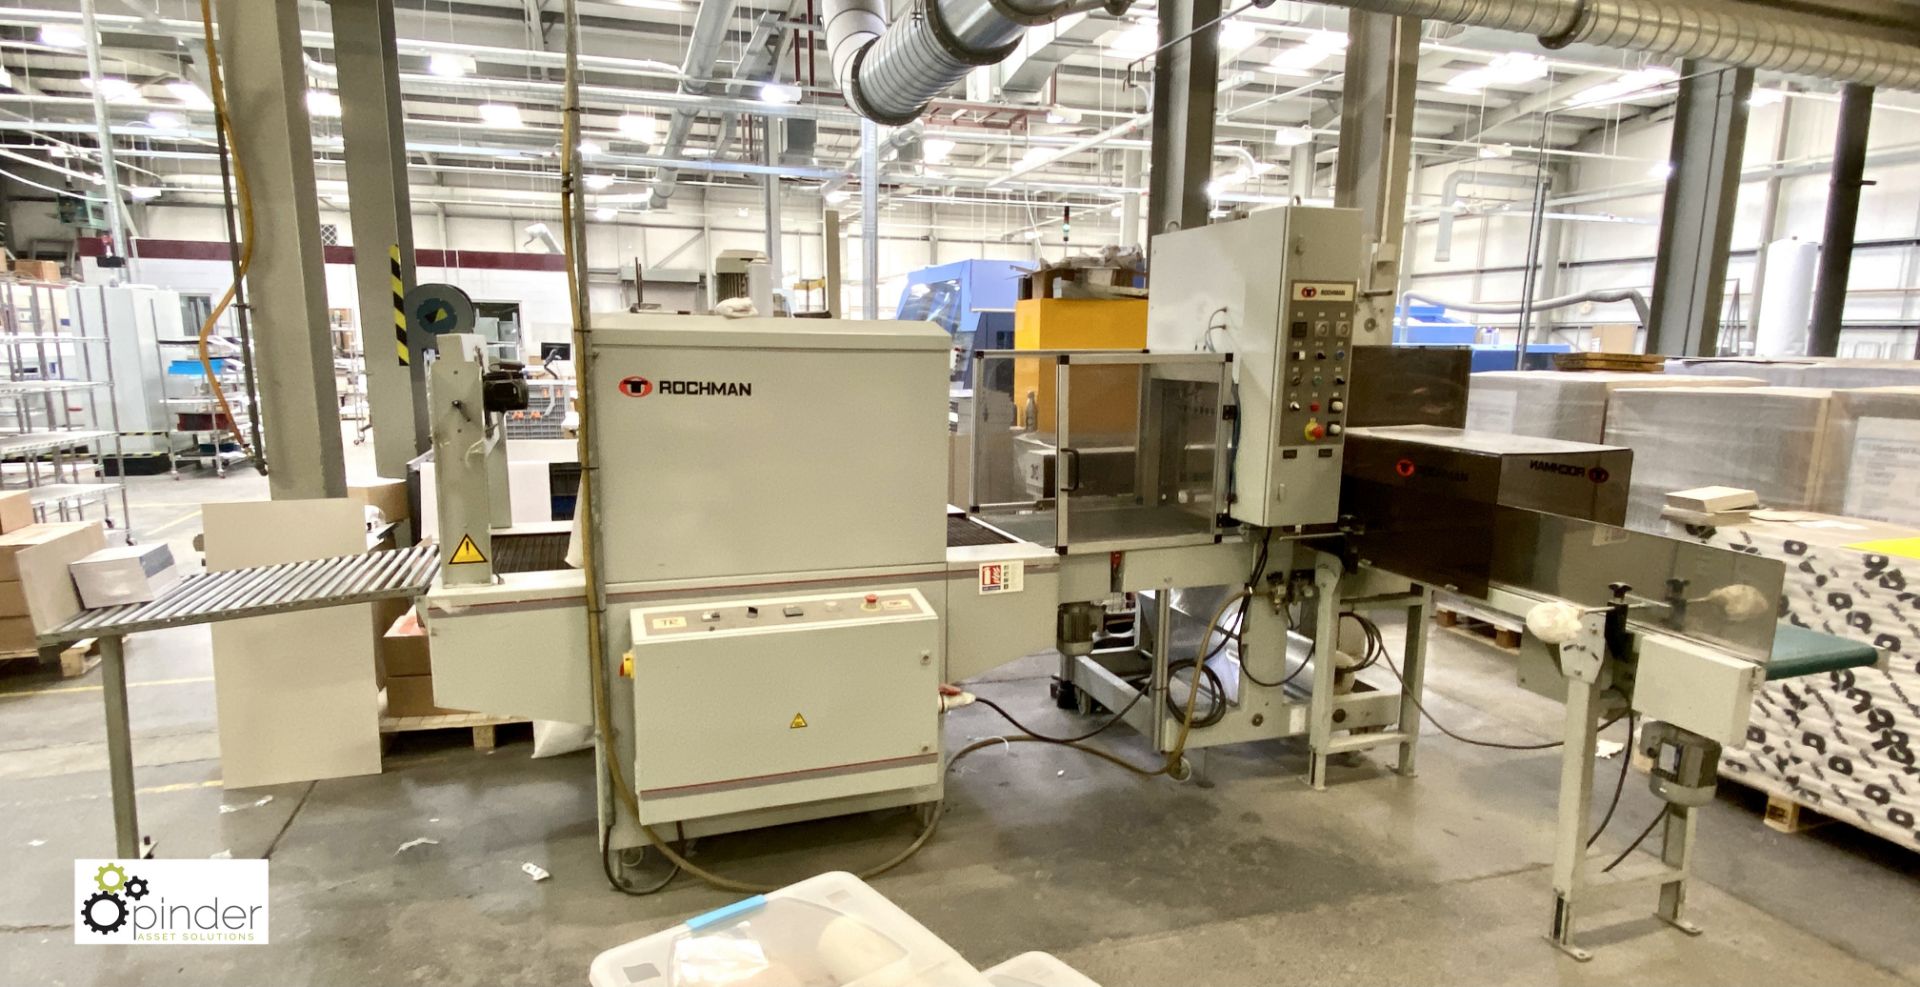 Rochman SVA60/35 Sleeve Sealer, 400volts, serial number 4881206, year 2007, with Rochman TR65/ - Image 2 of 15